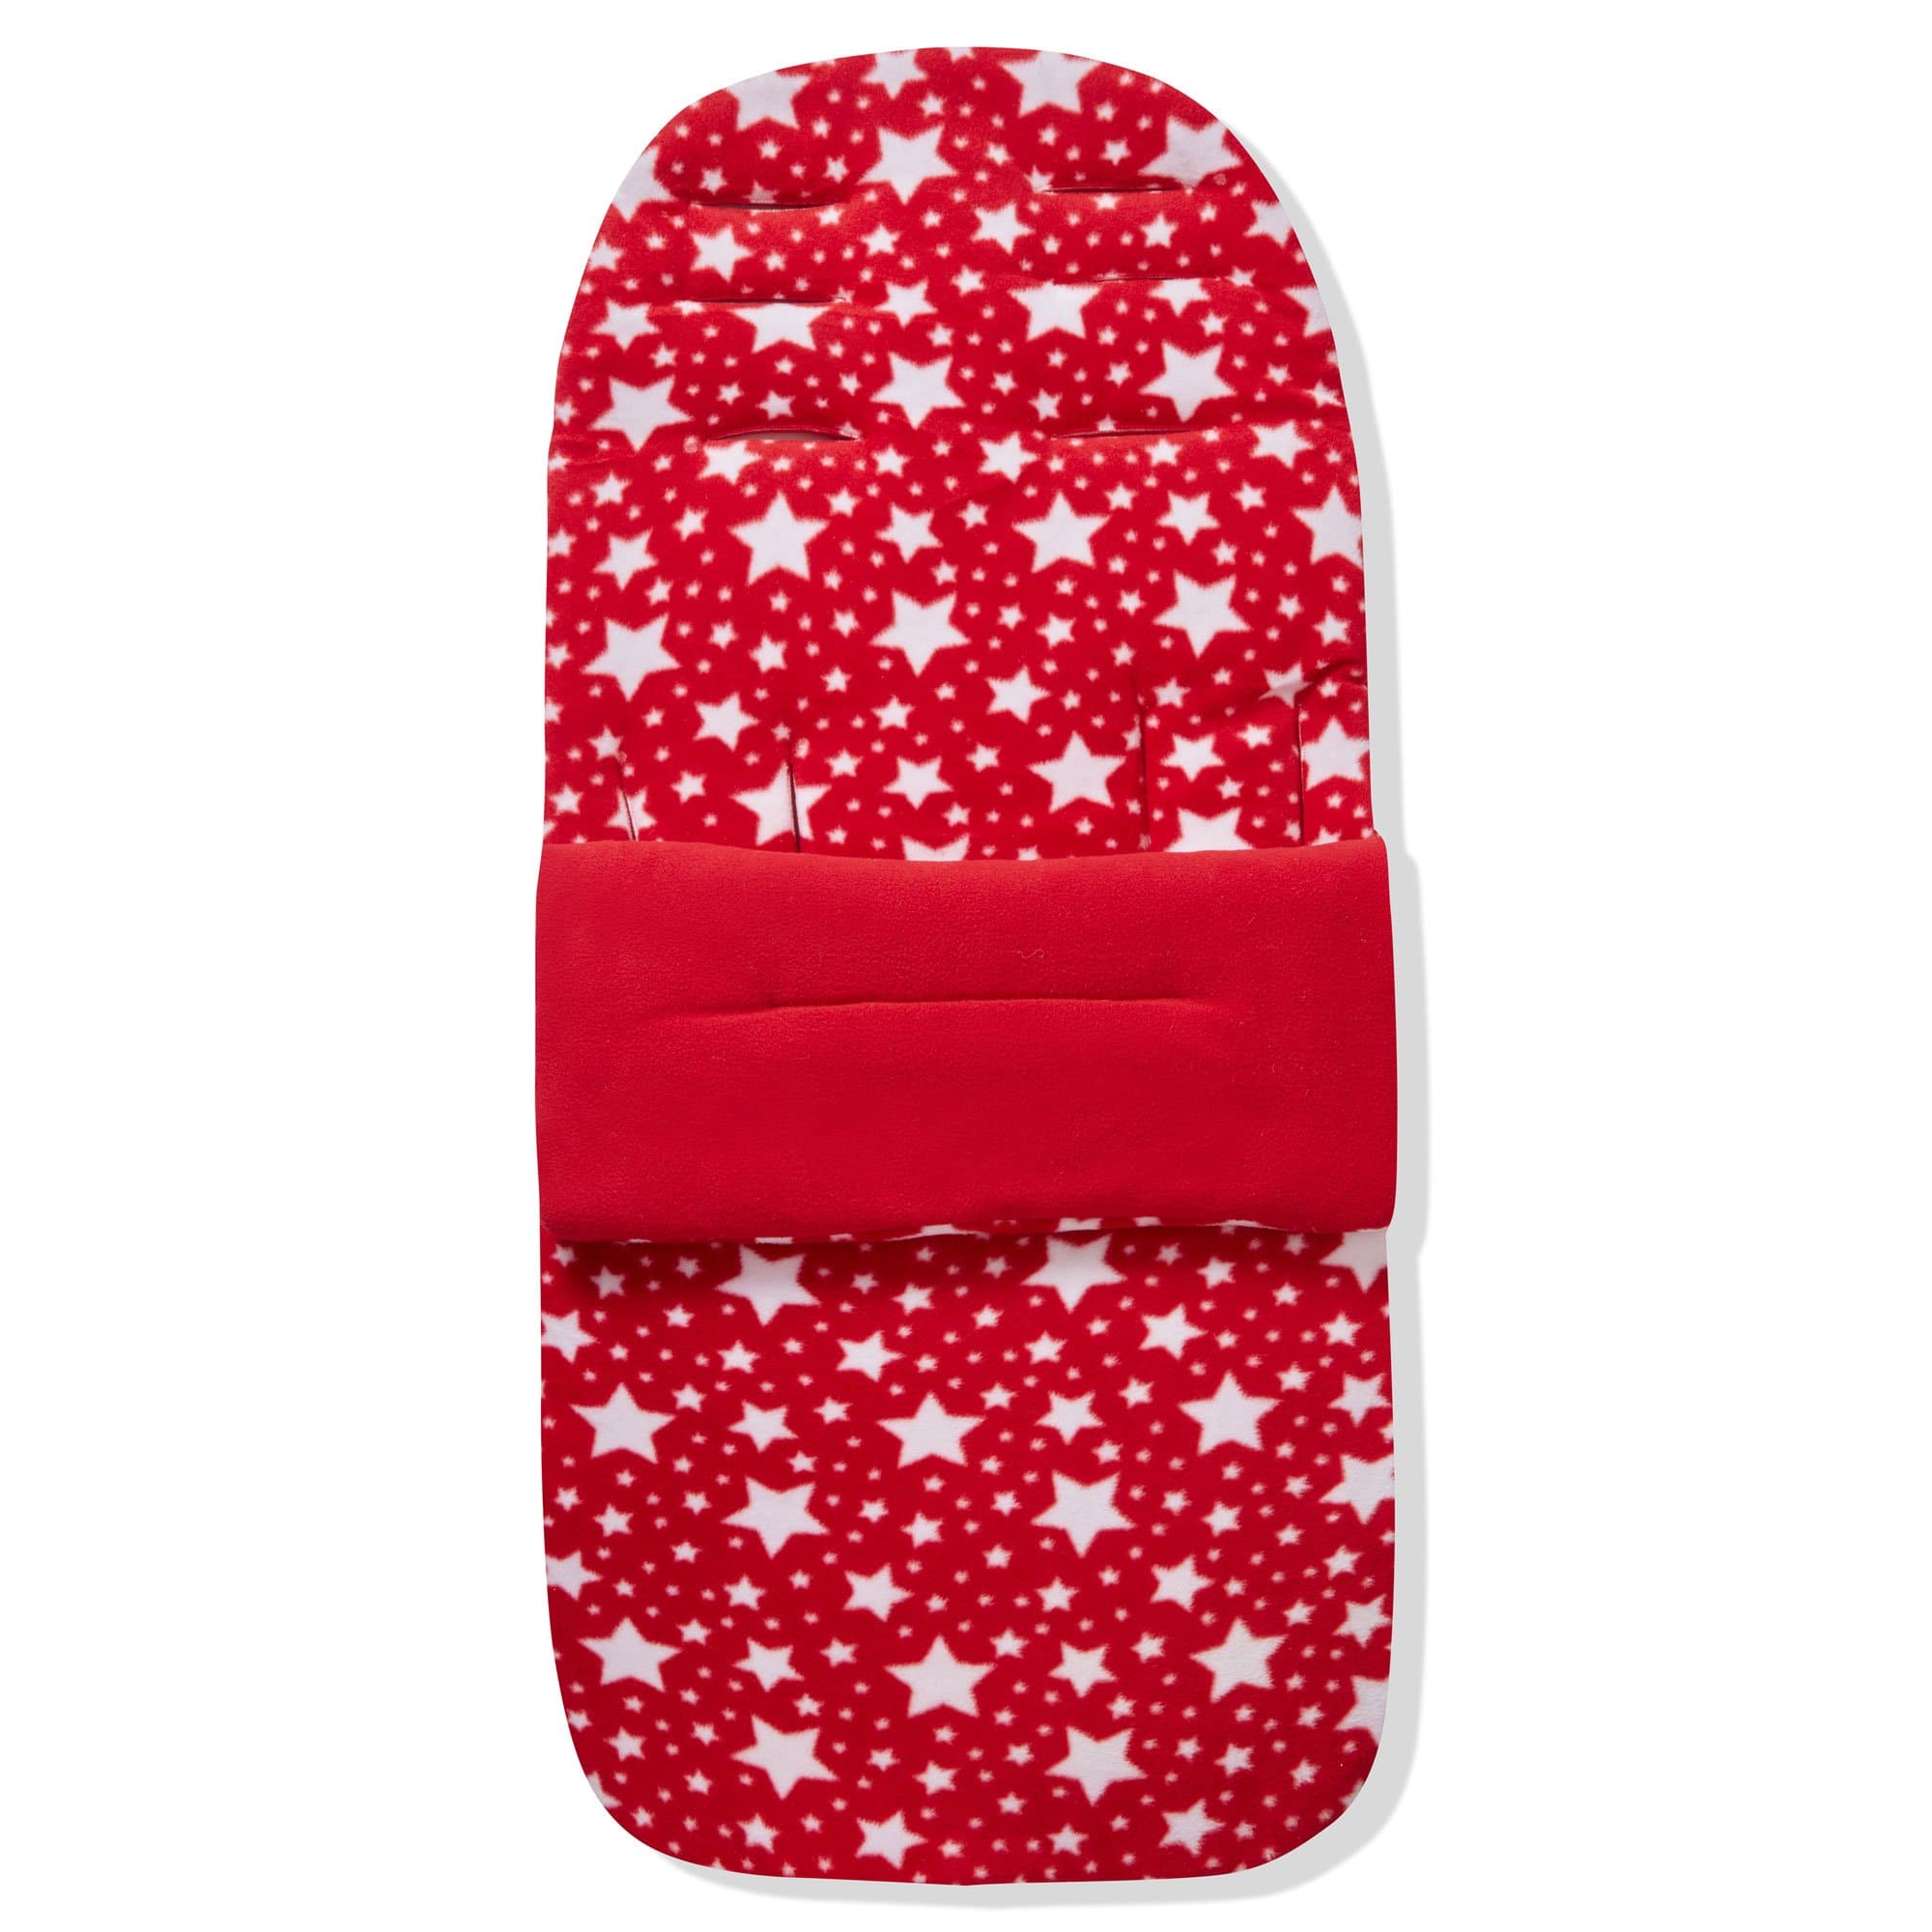 Fleece Footmuff / Cosy Toes Compatible with Firstwheels - Red Star / Fits All Models | For Your Little One